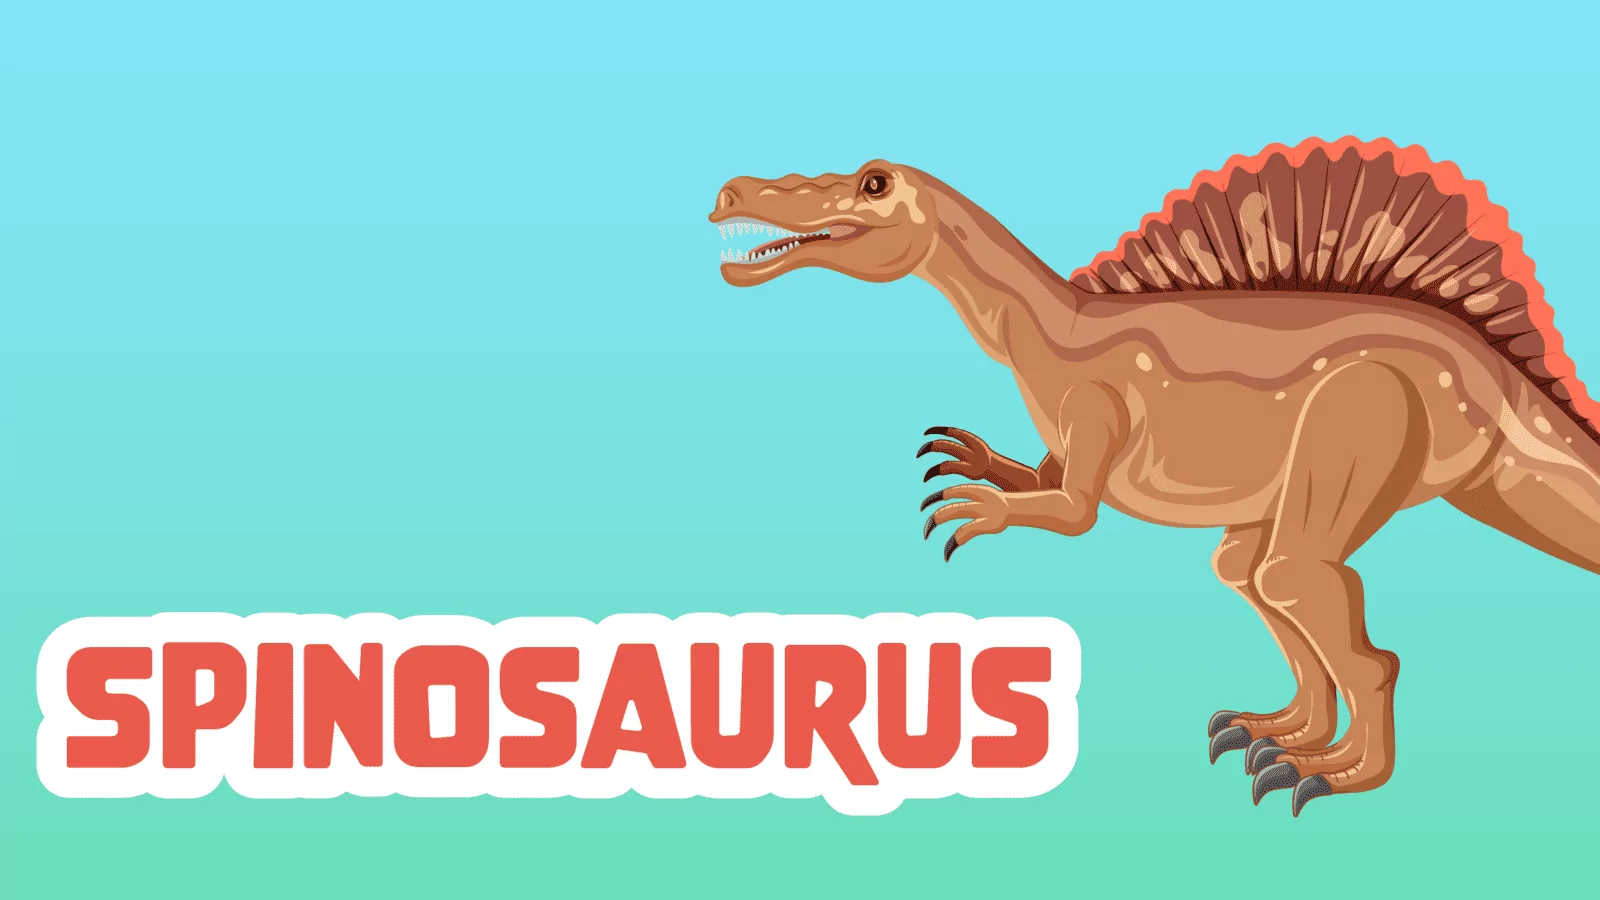 Spinosaurus Facts for Kids – 5 Spectacular Facts about Spinosaurus